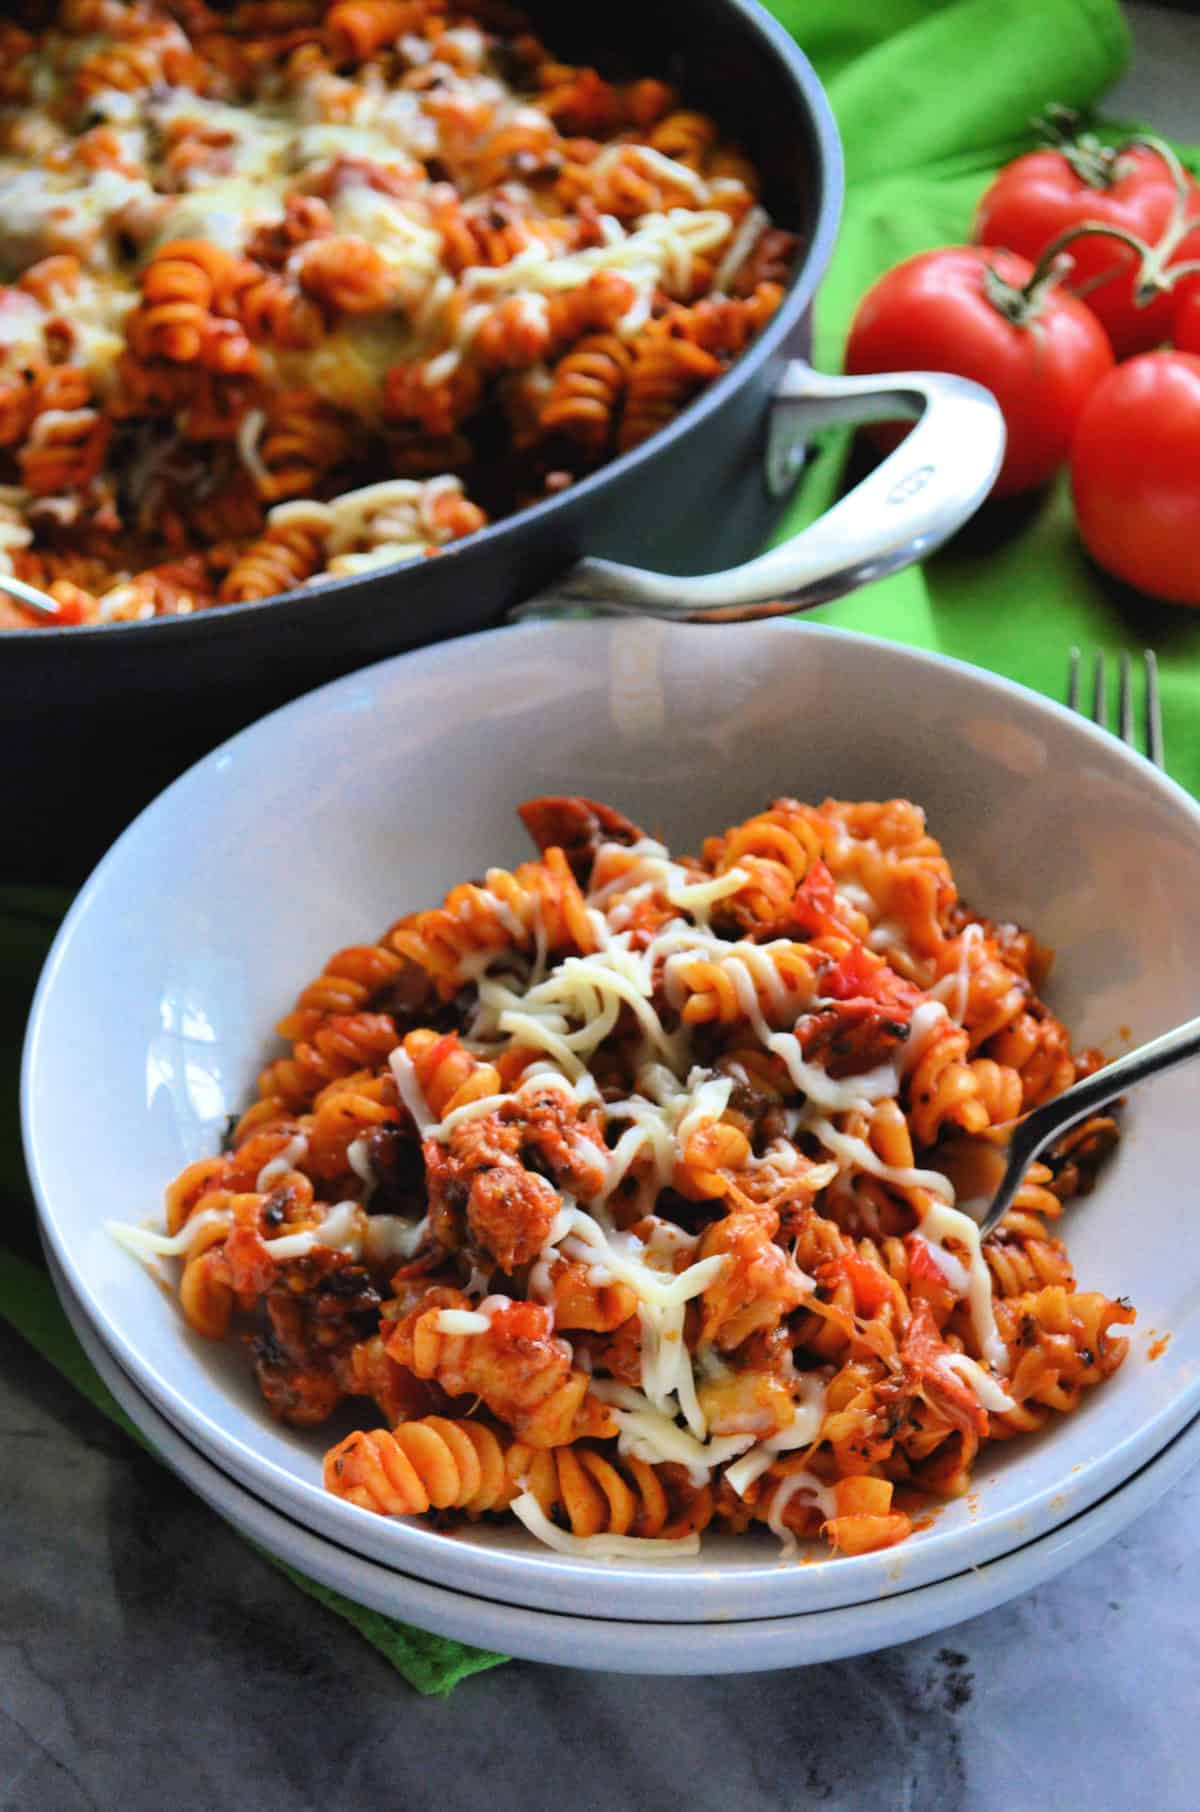 skillet and plate both with rotini in red sauce topped with herbs and melted white cheese.